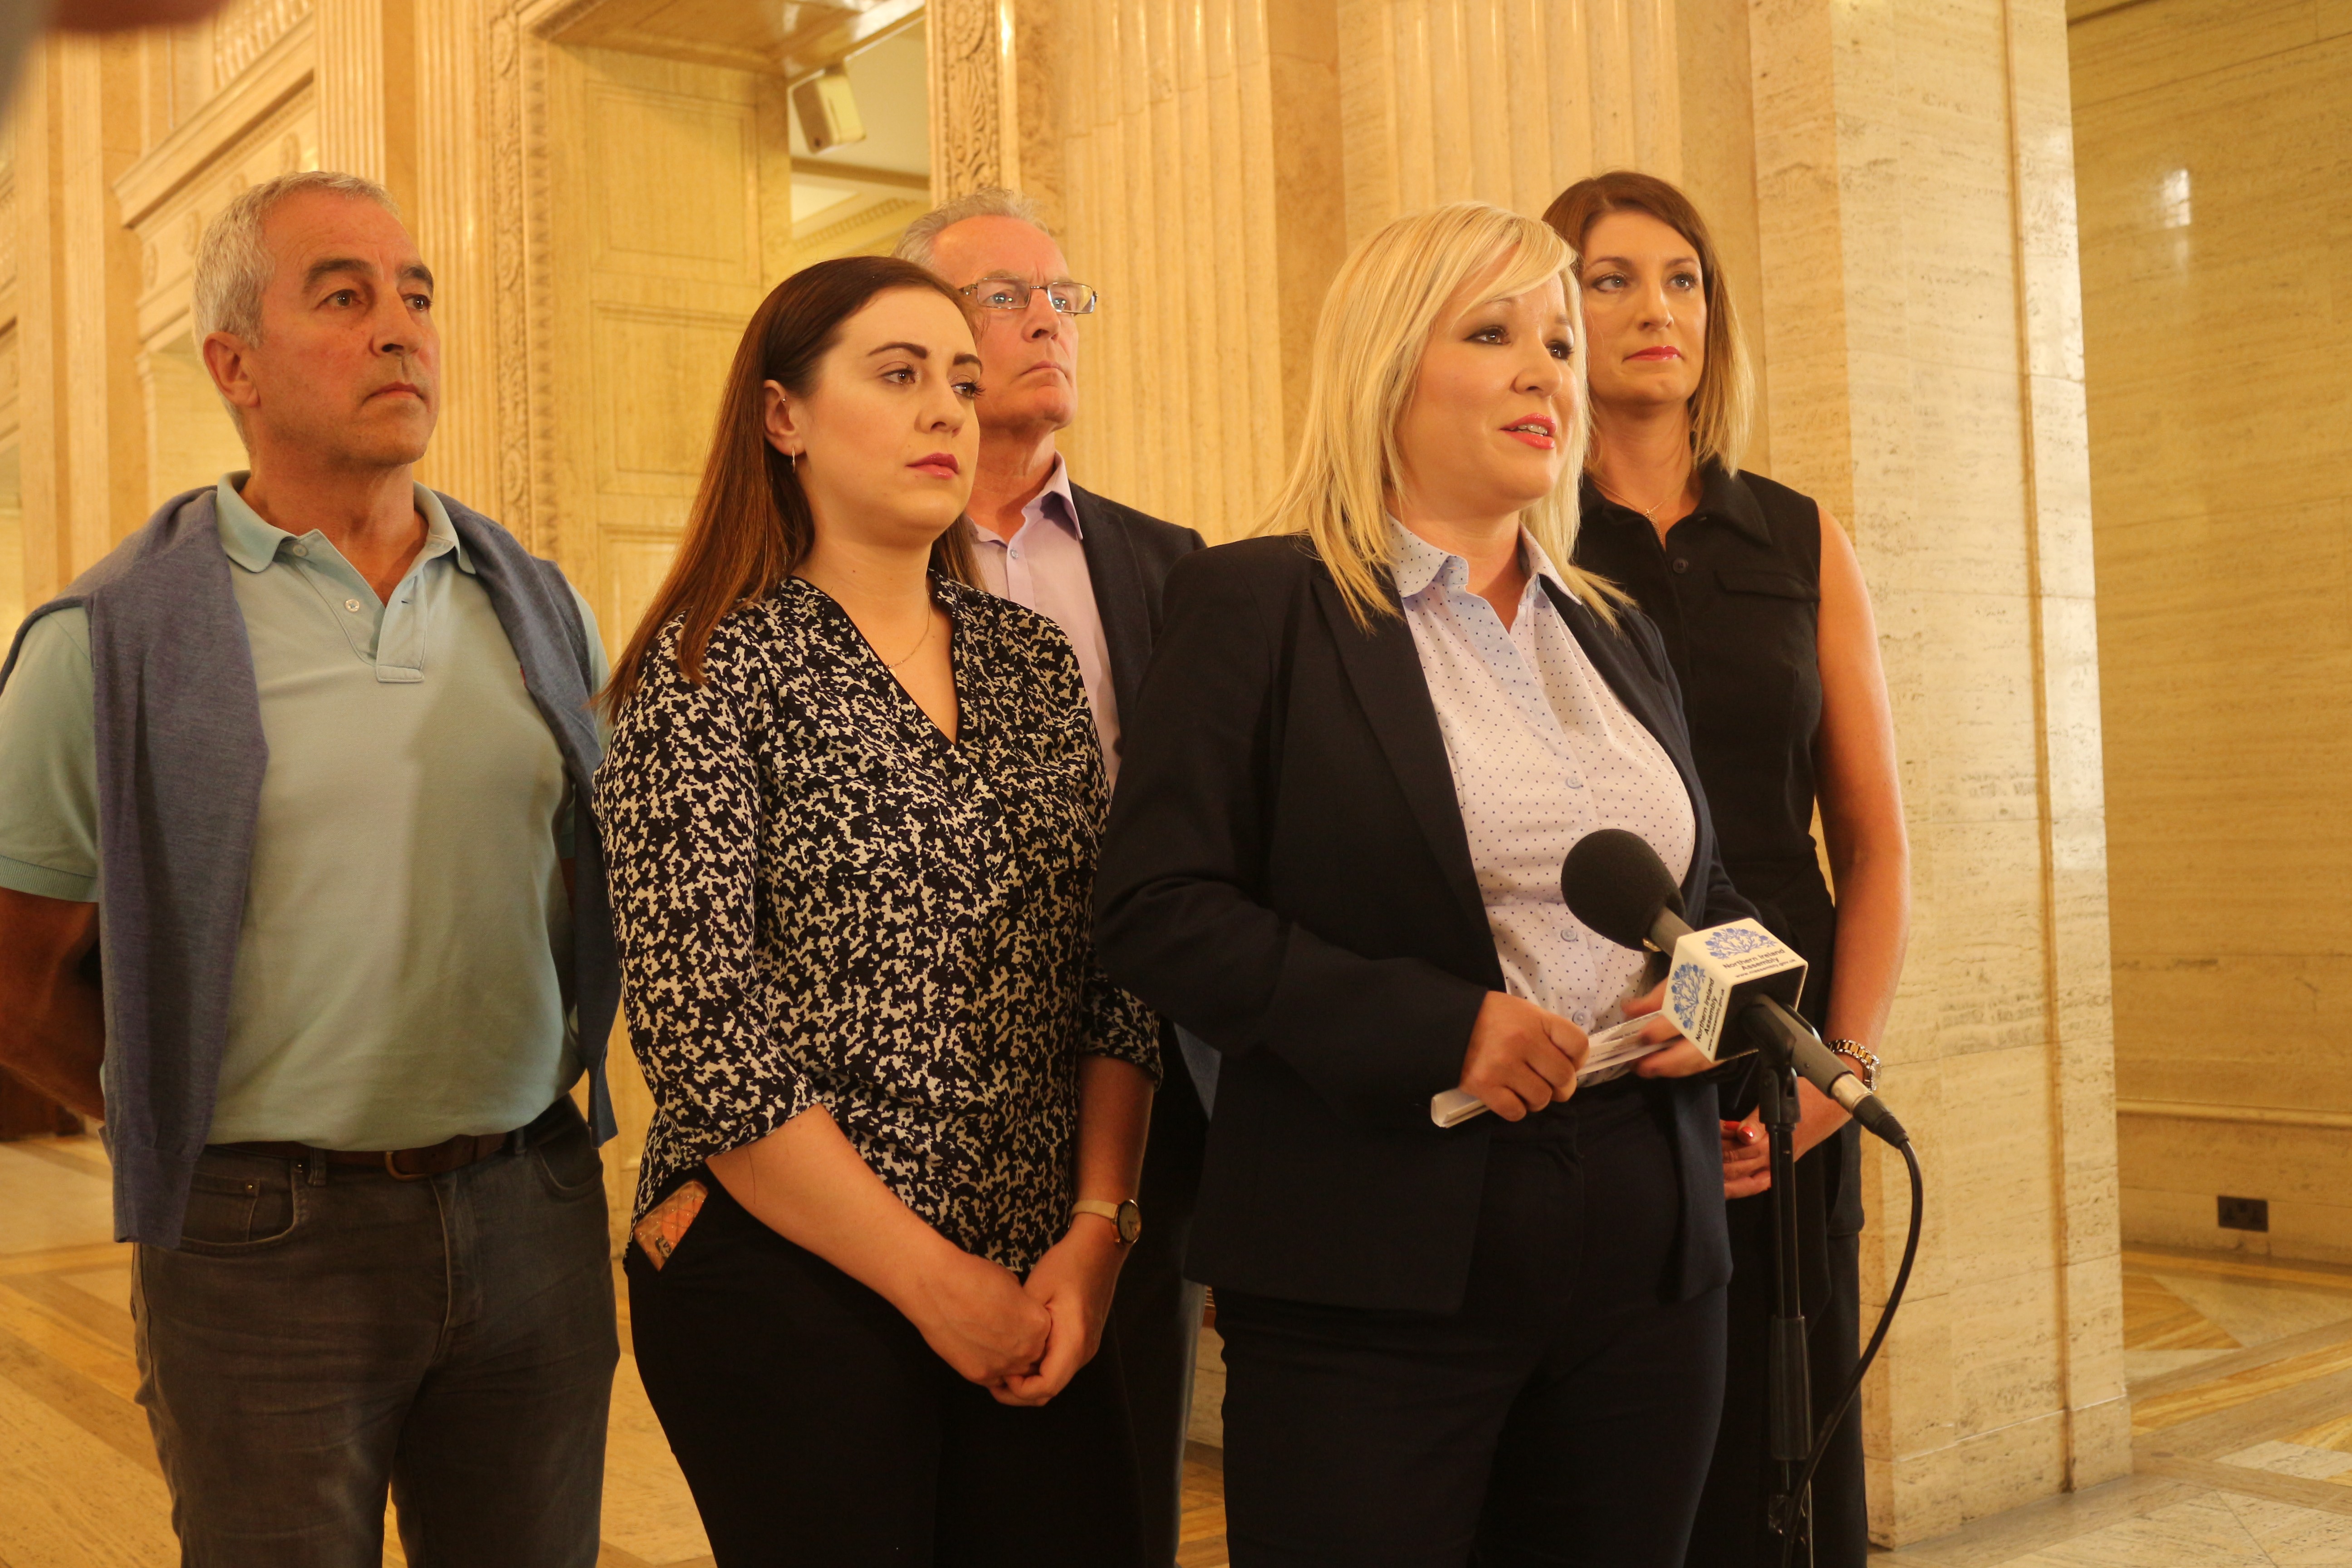 Michelle O'Neill addressing the media at Stormont.